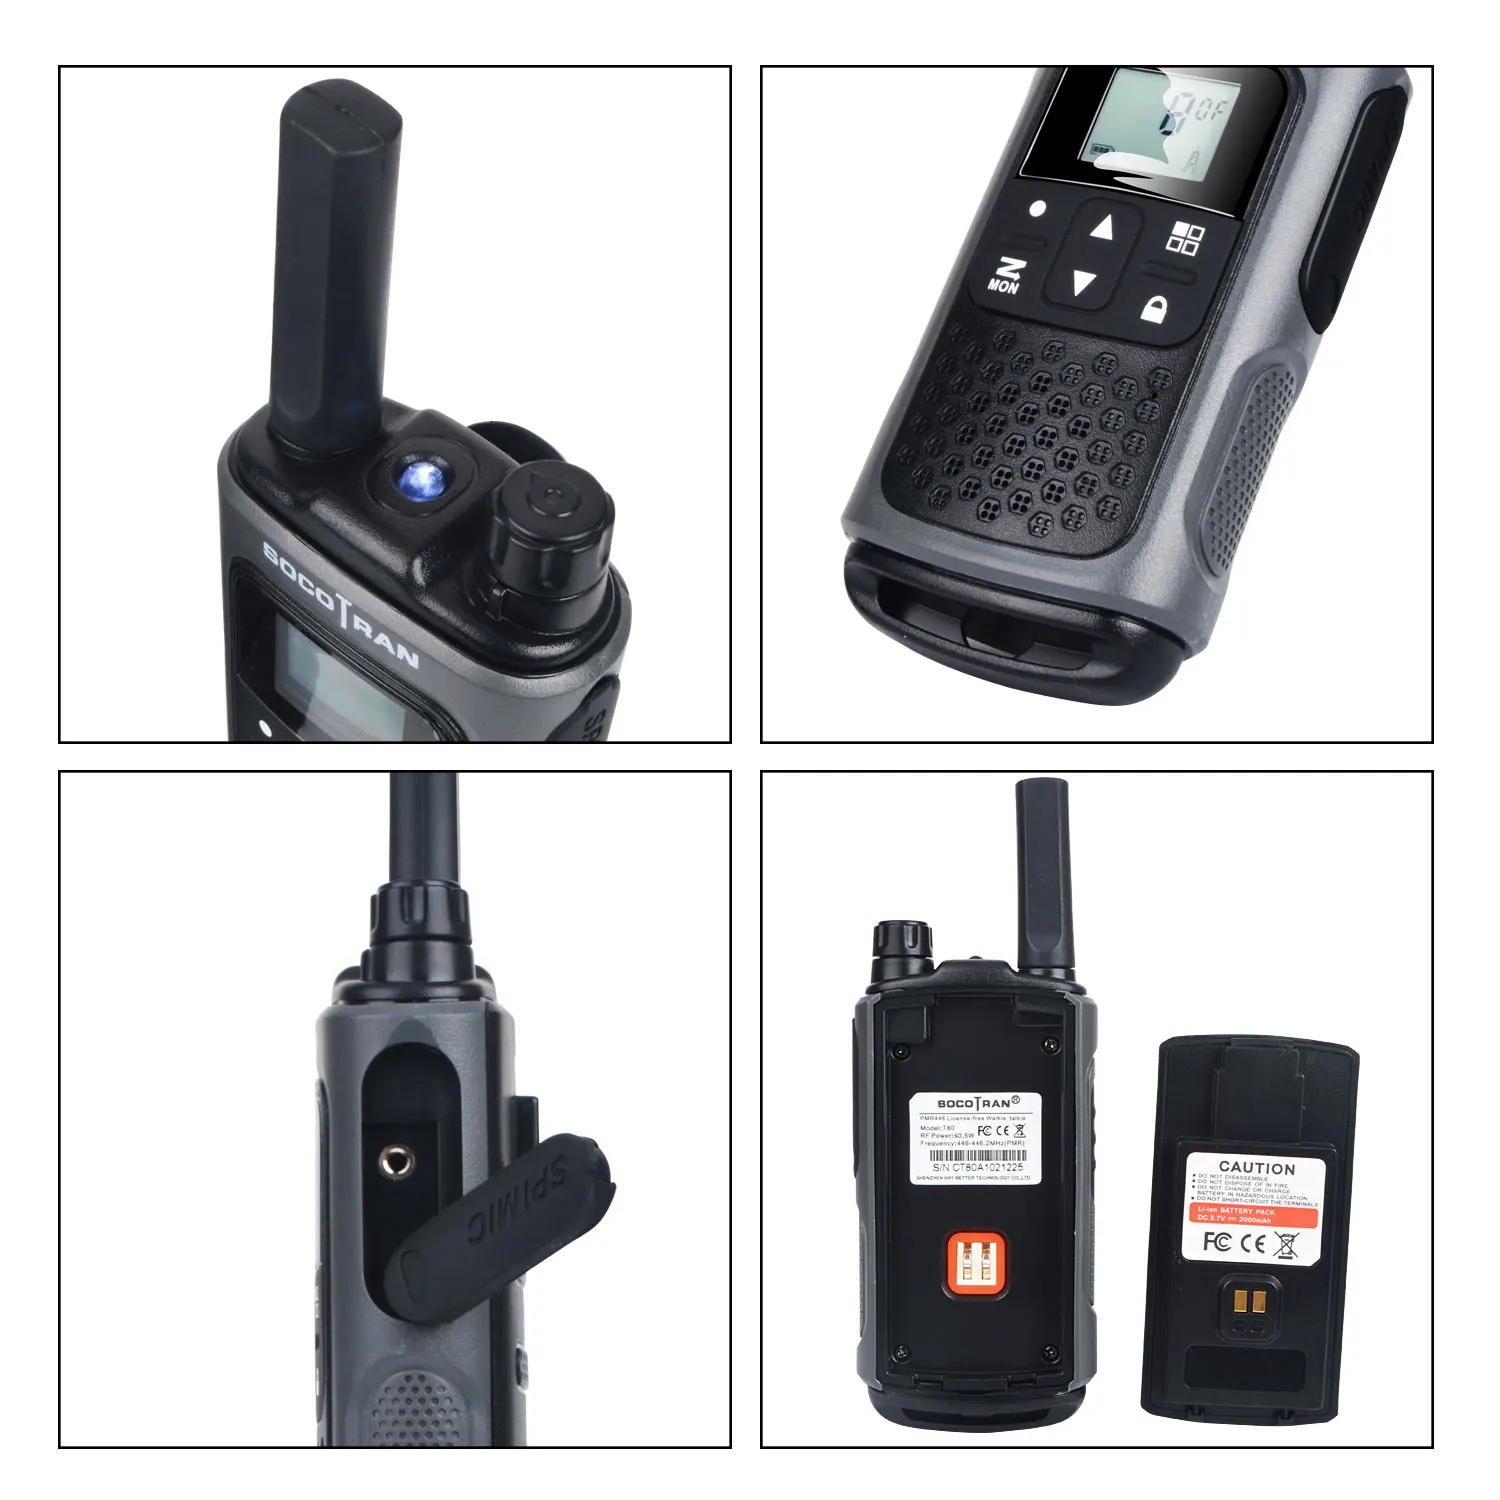 Rechargeable walky talky long distance T80 pmr walkie talkie with privacy  code VOX PMR446 ham Radio License free two way radio AliExpress